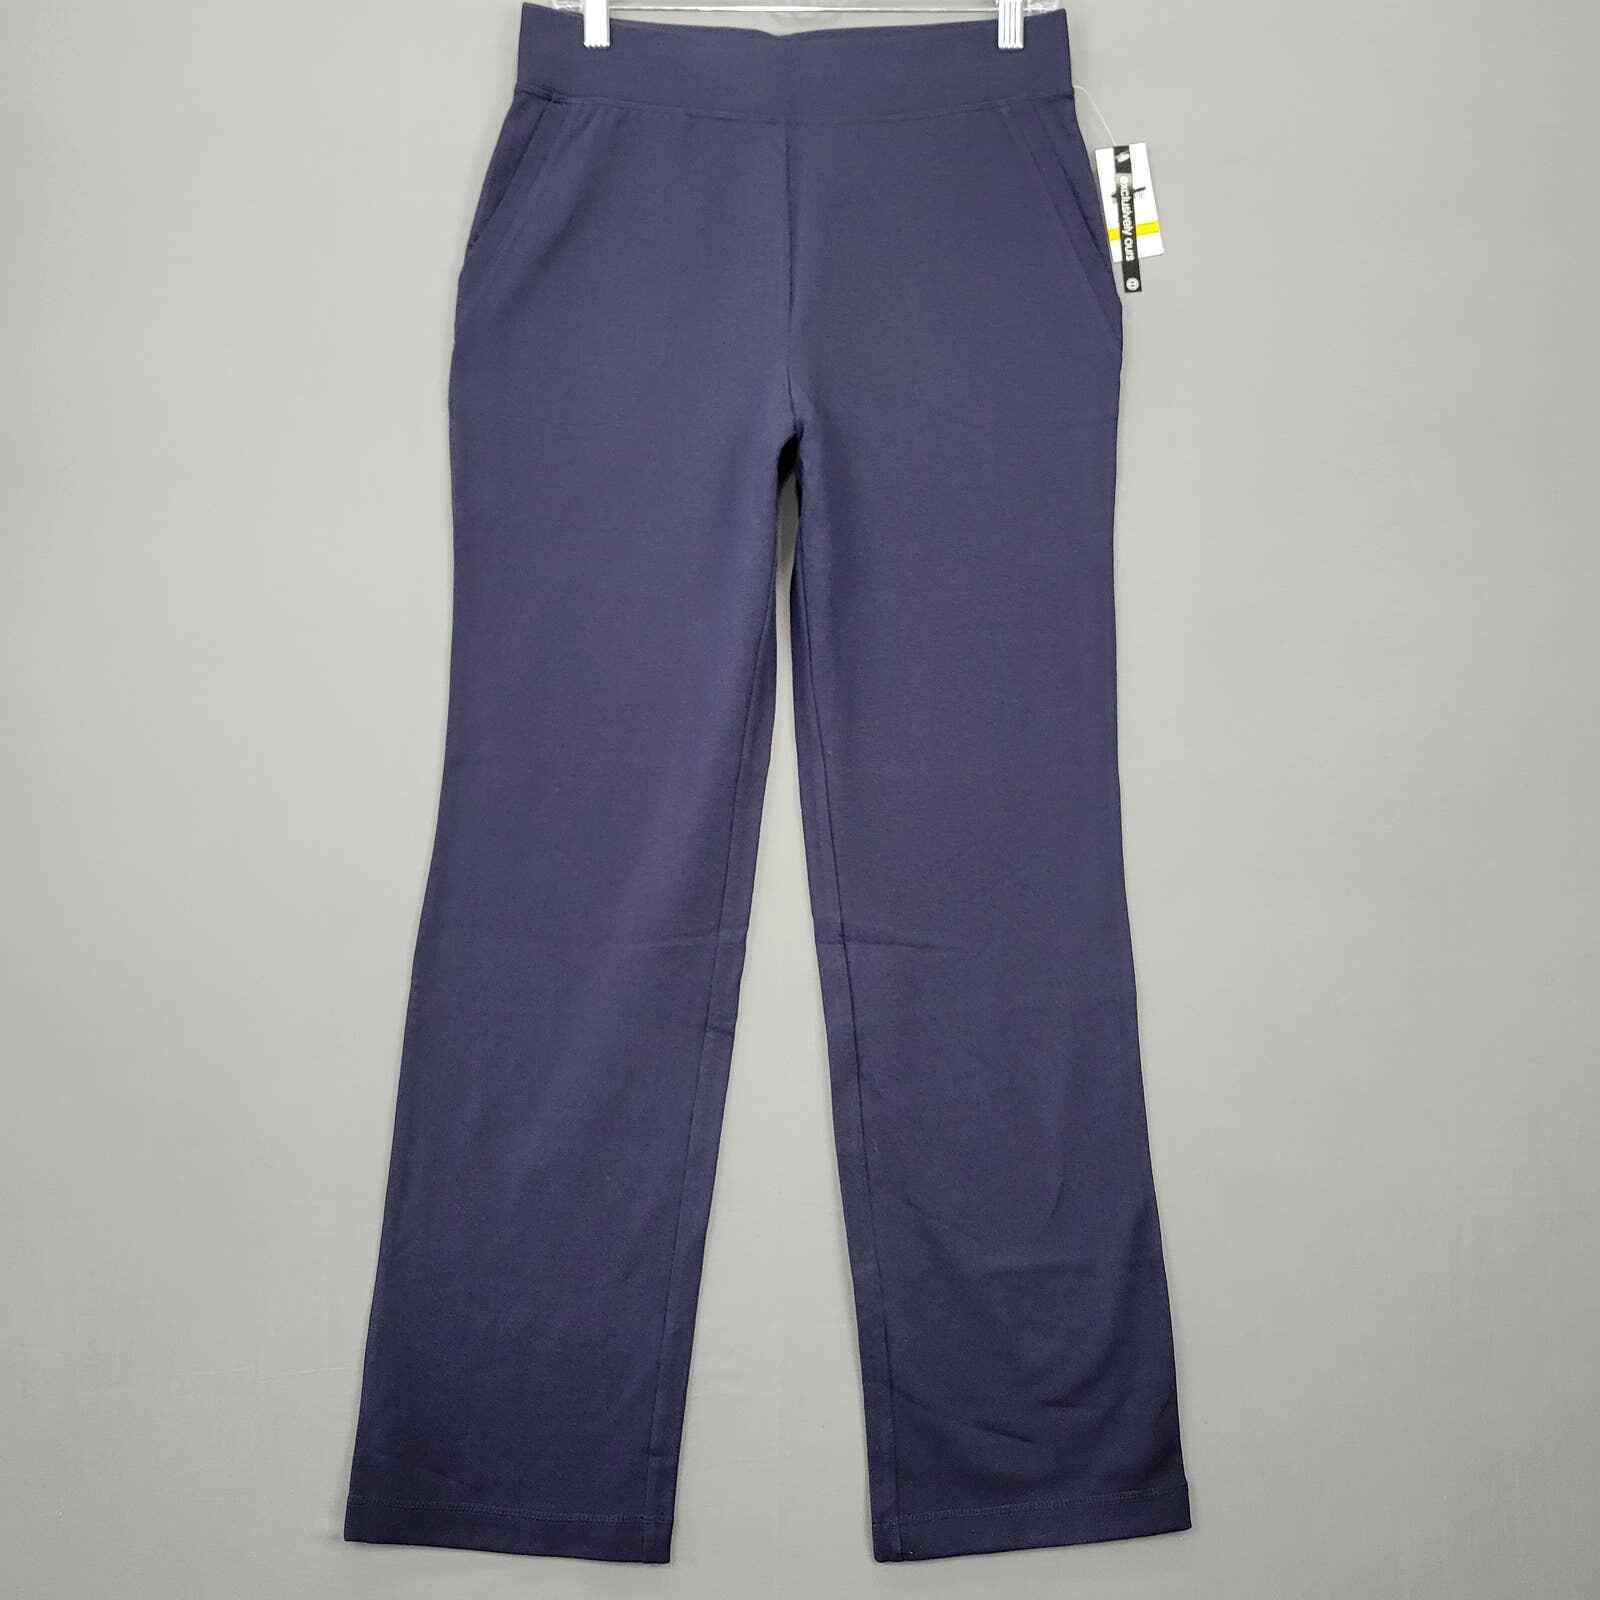 Primary image for Studio Works Women Pants Size S Blue Navy Stretch Straight Pull-On Pocket Casual